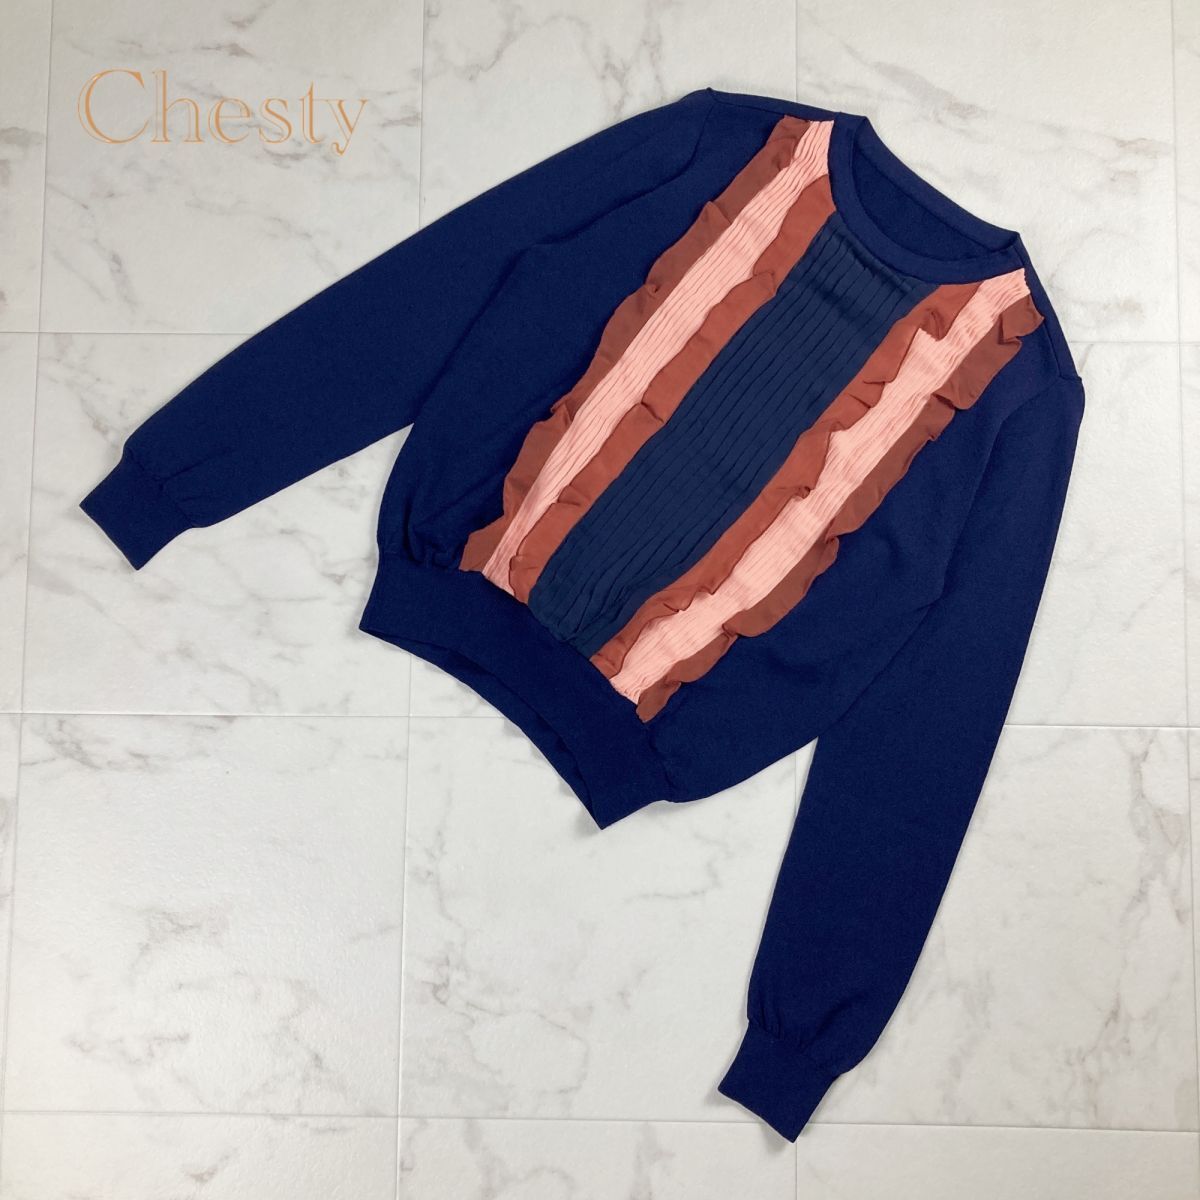  beautiful goods Chesty Chesty design pleat frill long sleeve cut and sewn tops lady's navy blue navy size F*NC355